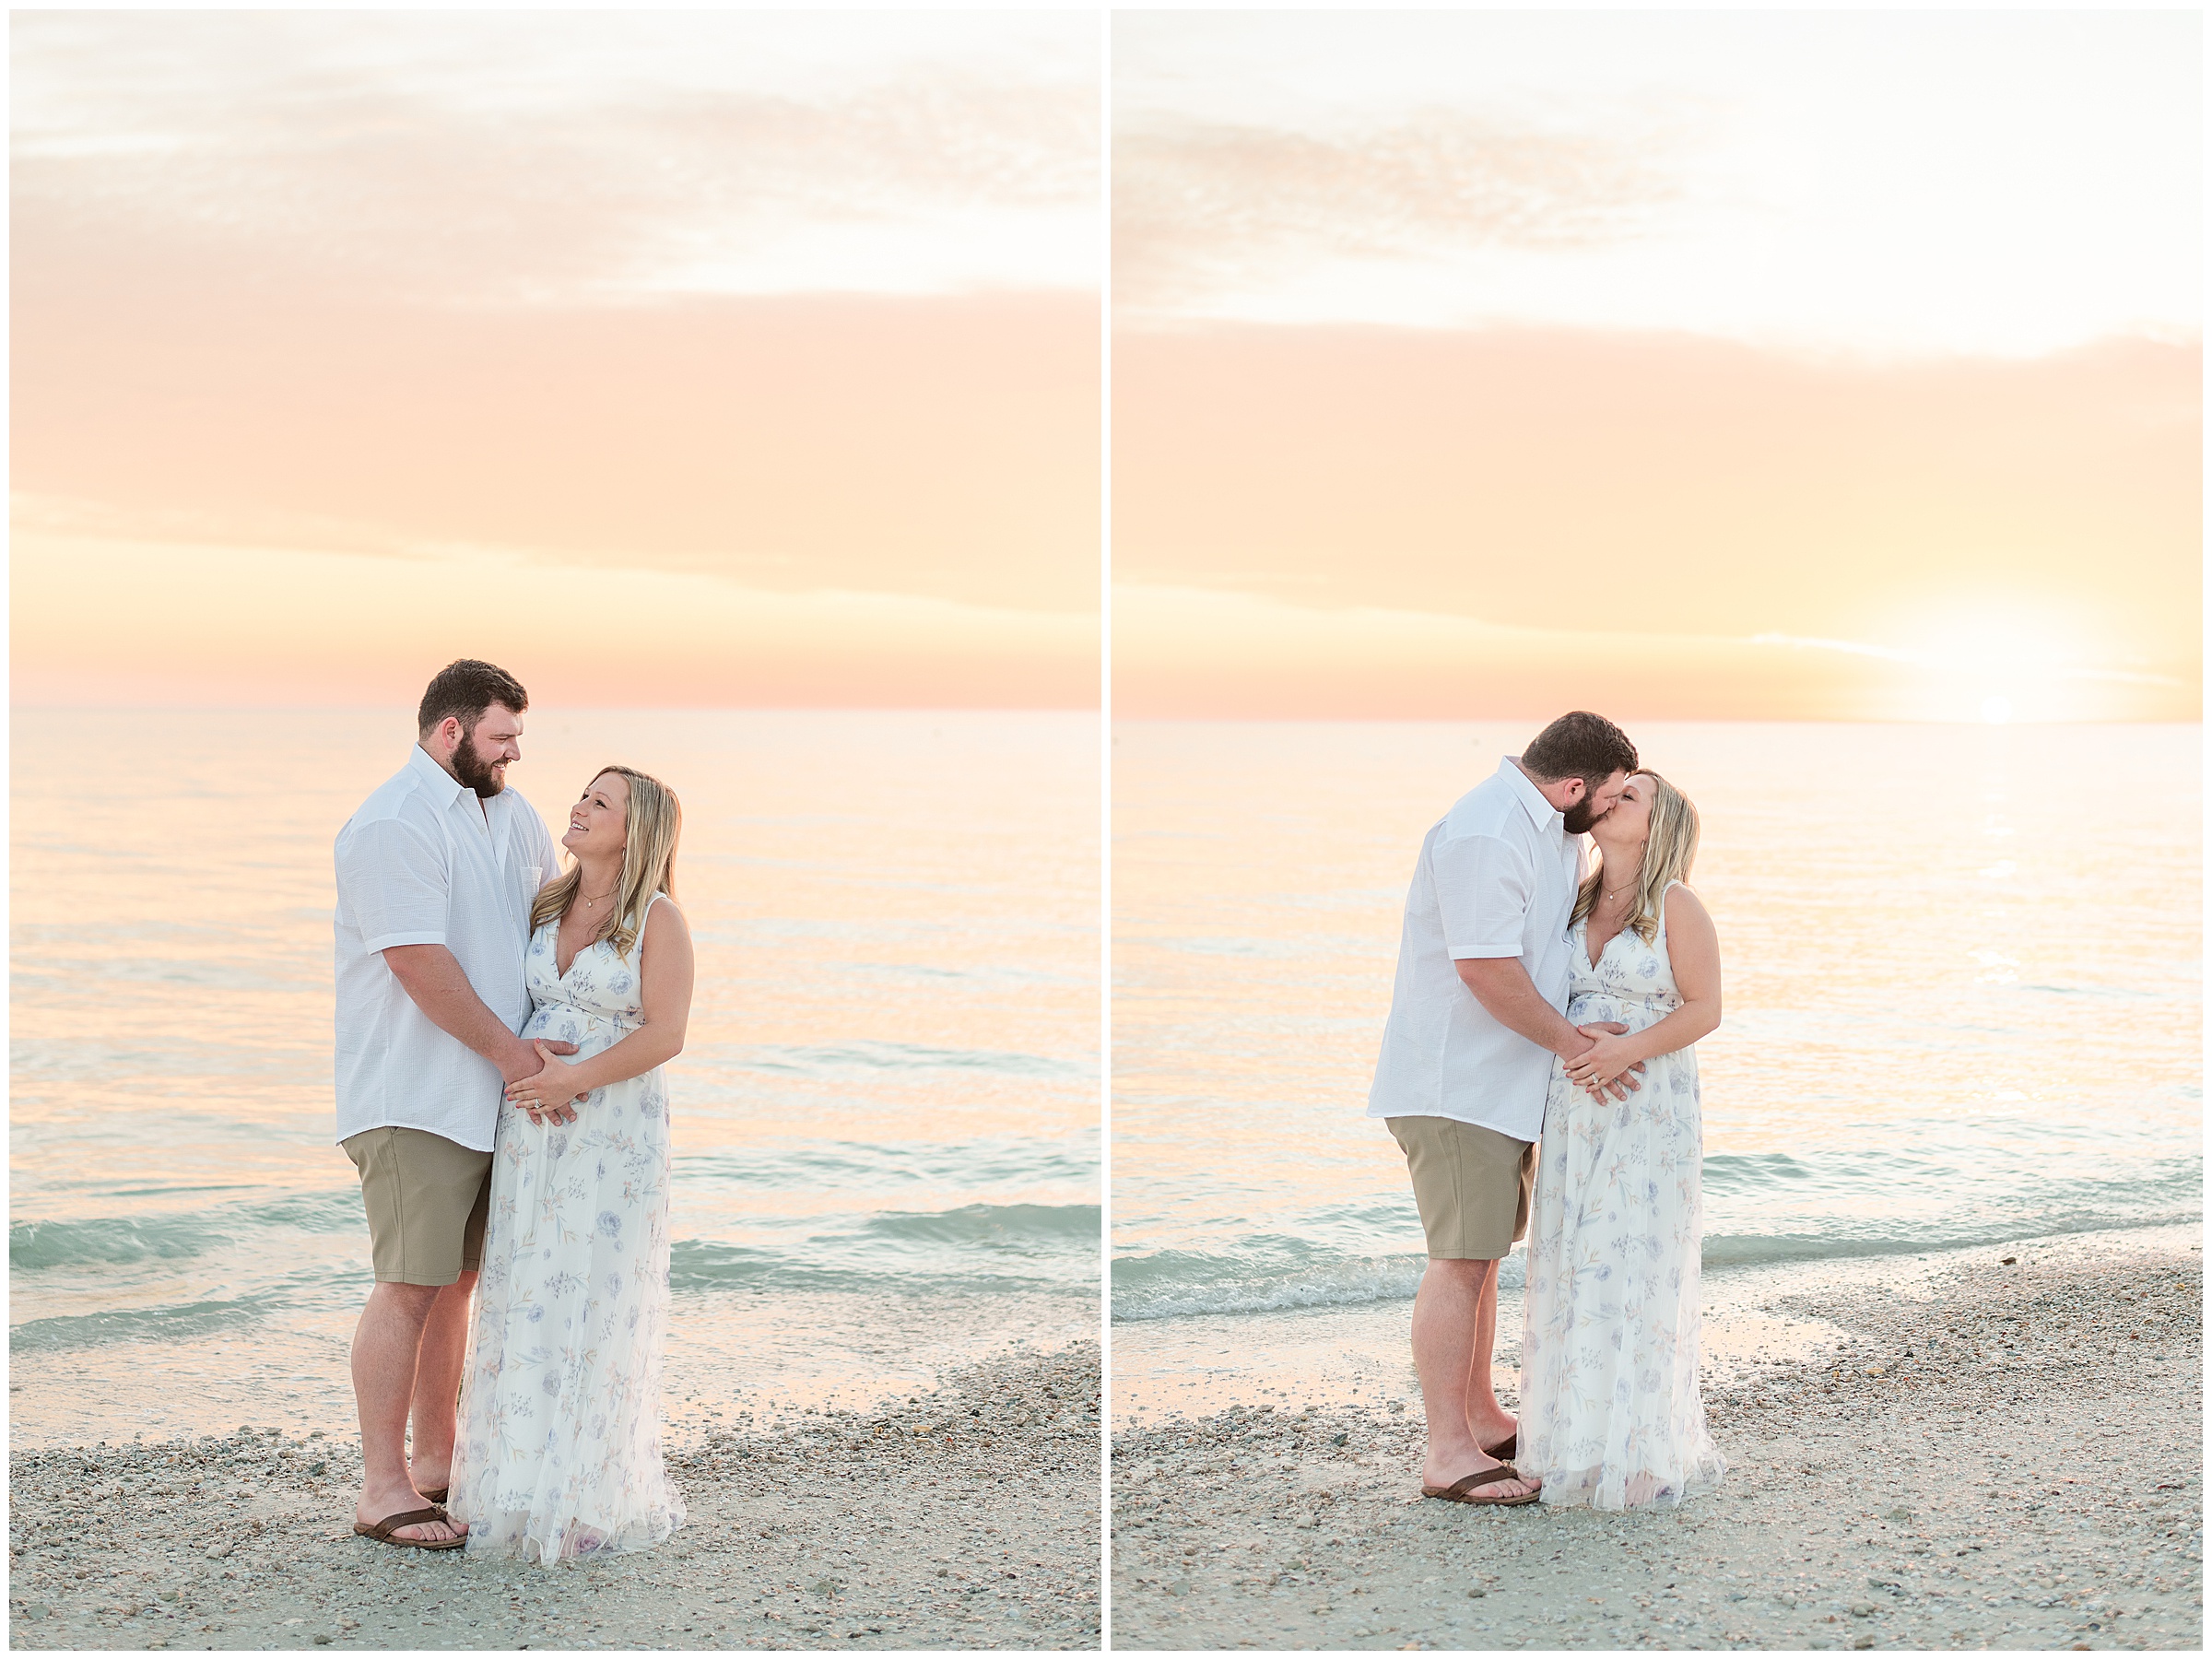 Brooke and Curt posing for maternity photos on the beach with the sunset behind them at Honeymoon Island State Park in Florida. 